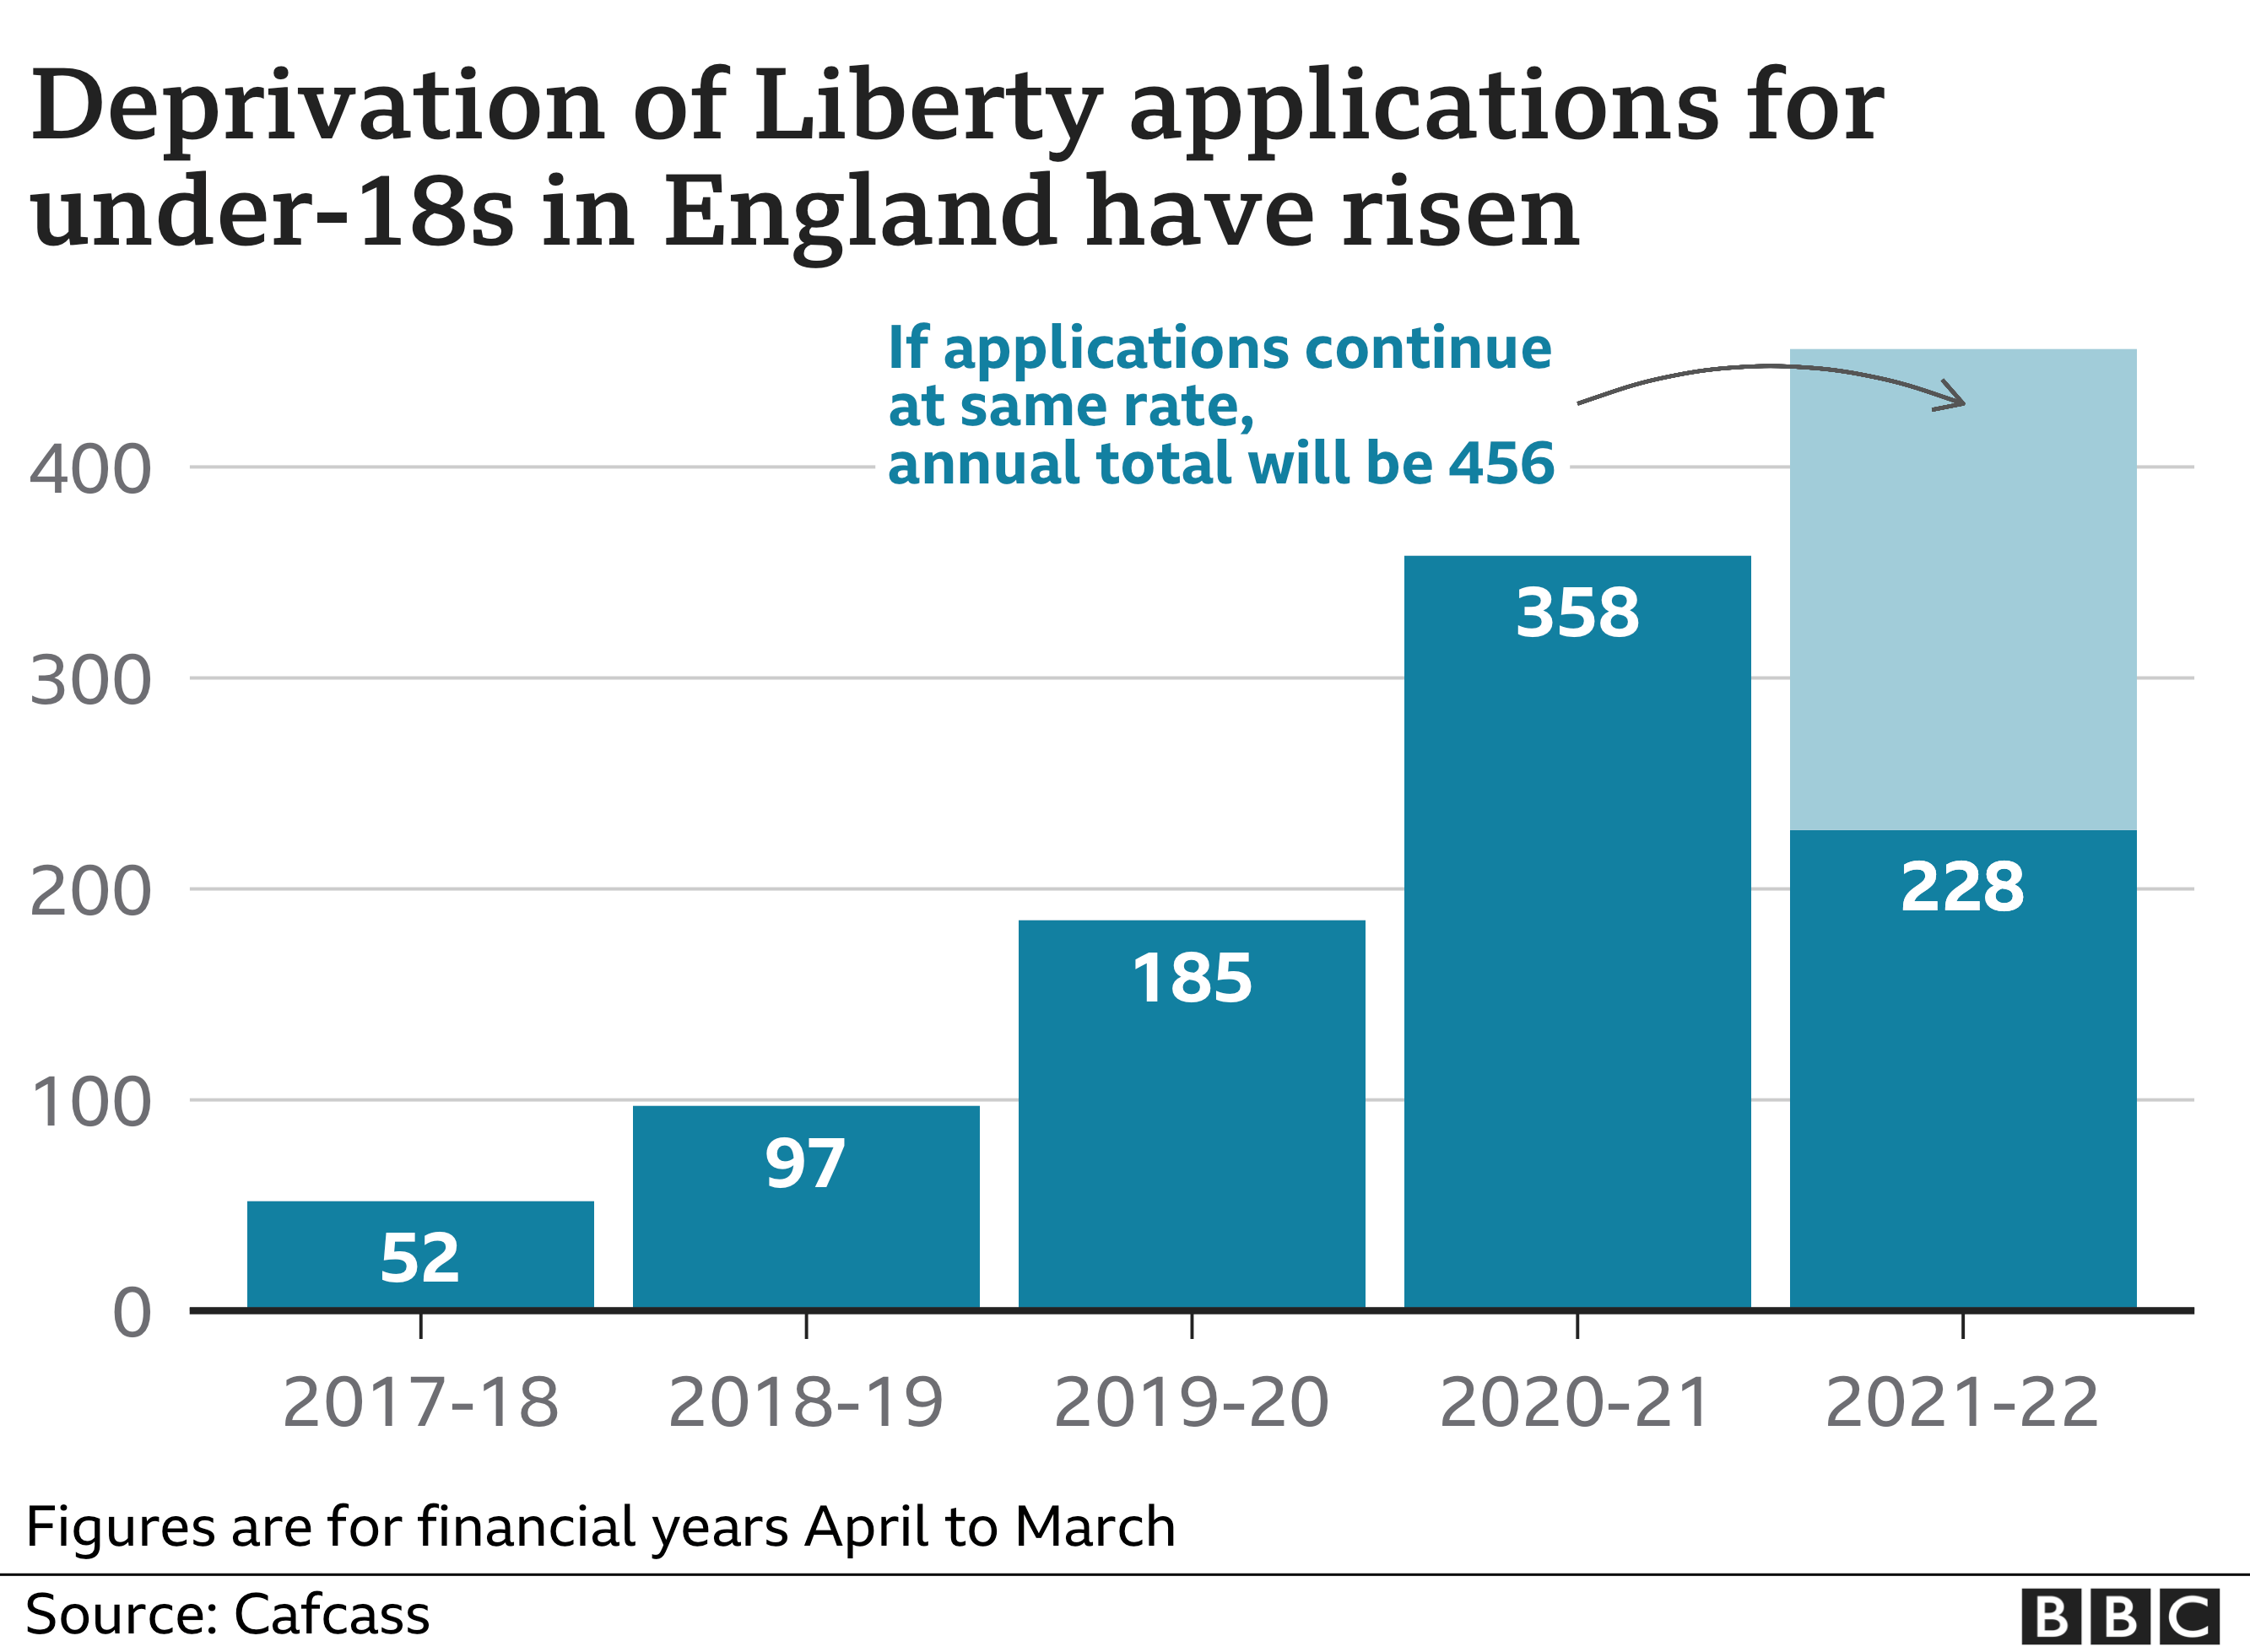 Bar chart showing how Deprivation of Liberty applications for under-18s in England have risen sharply over the past five years